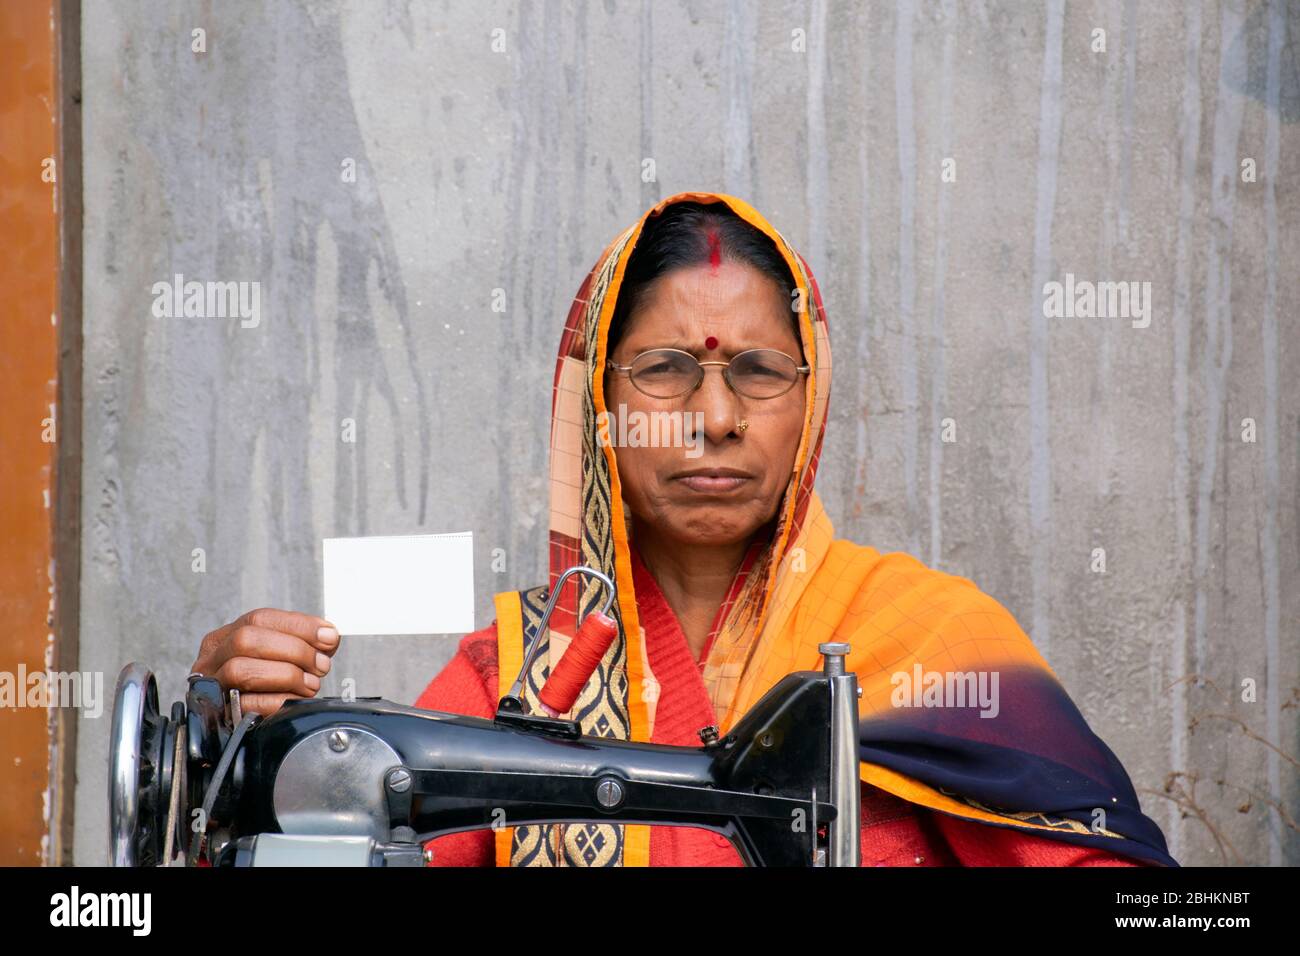 woman on a sewing machine making clothes in a rural indian village Stock Photo